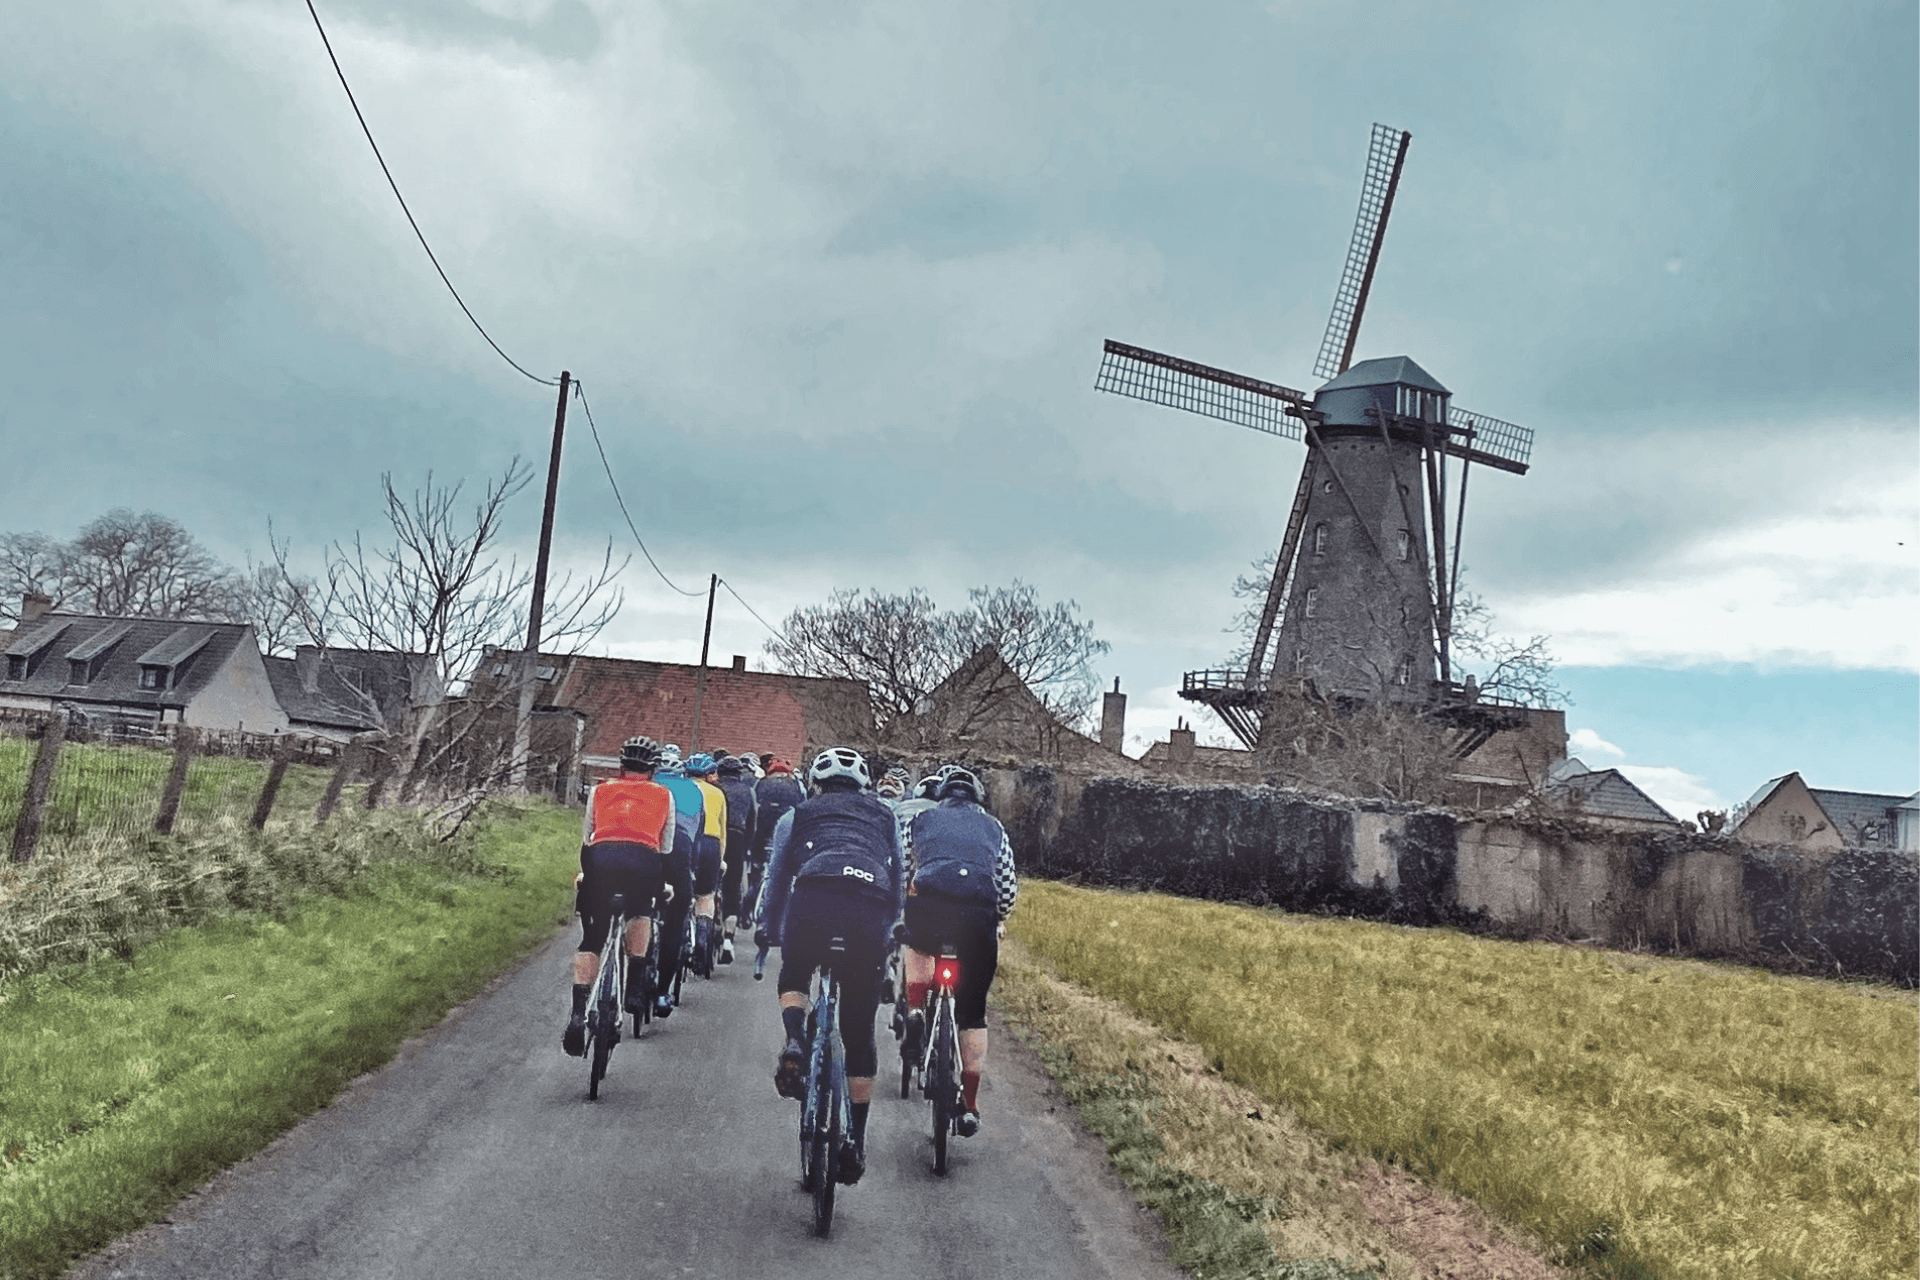 Road cyclists ride two abreast down a narrow farm road. A centuries old windmill features prominently in a small village off in the distance